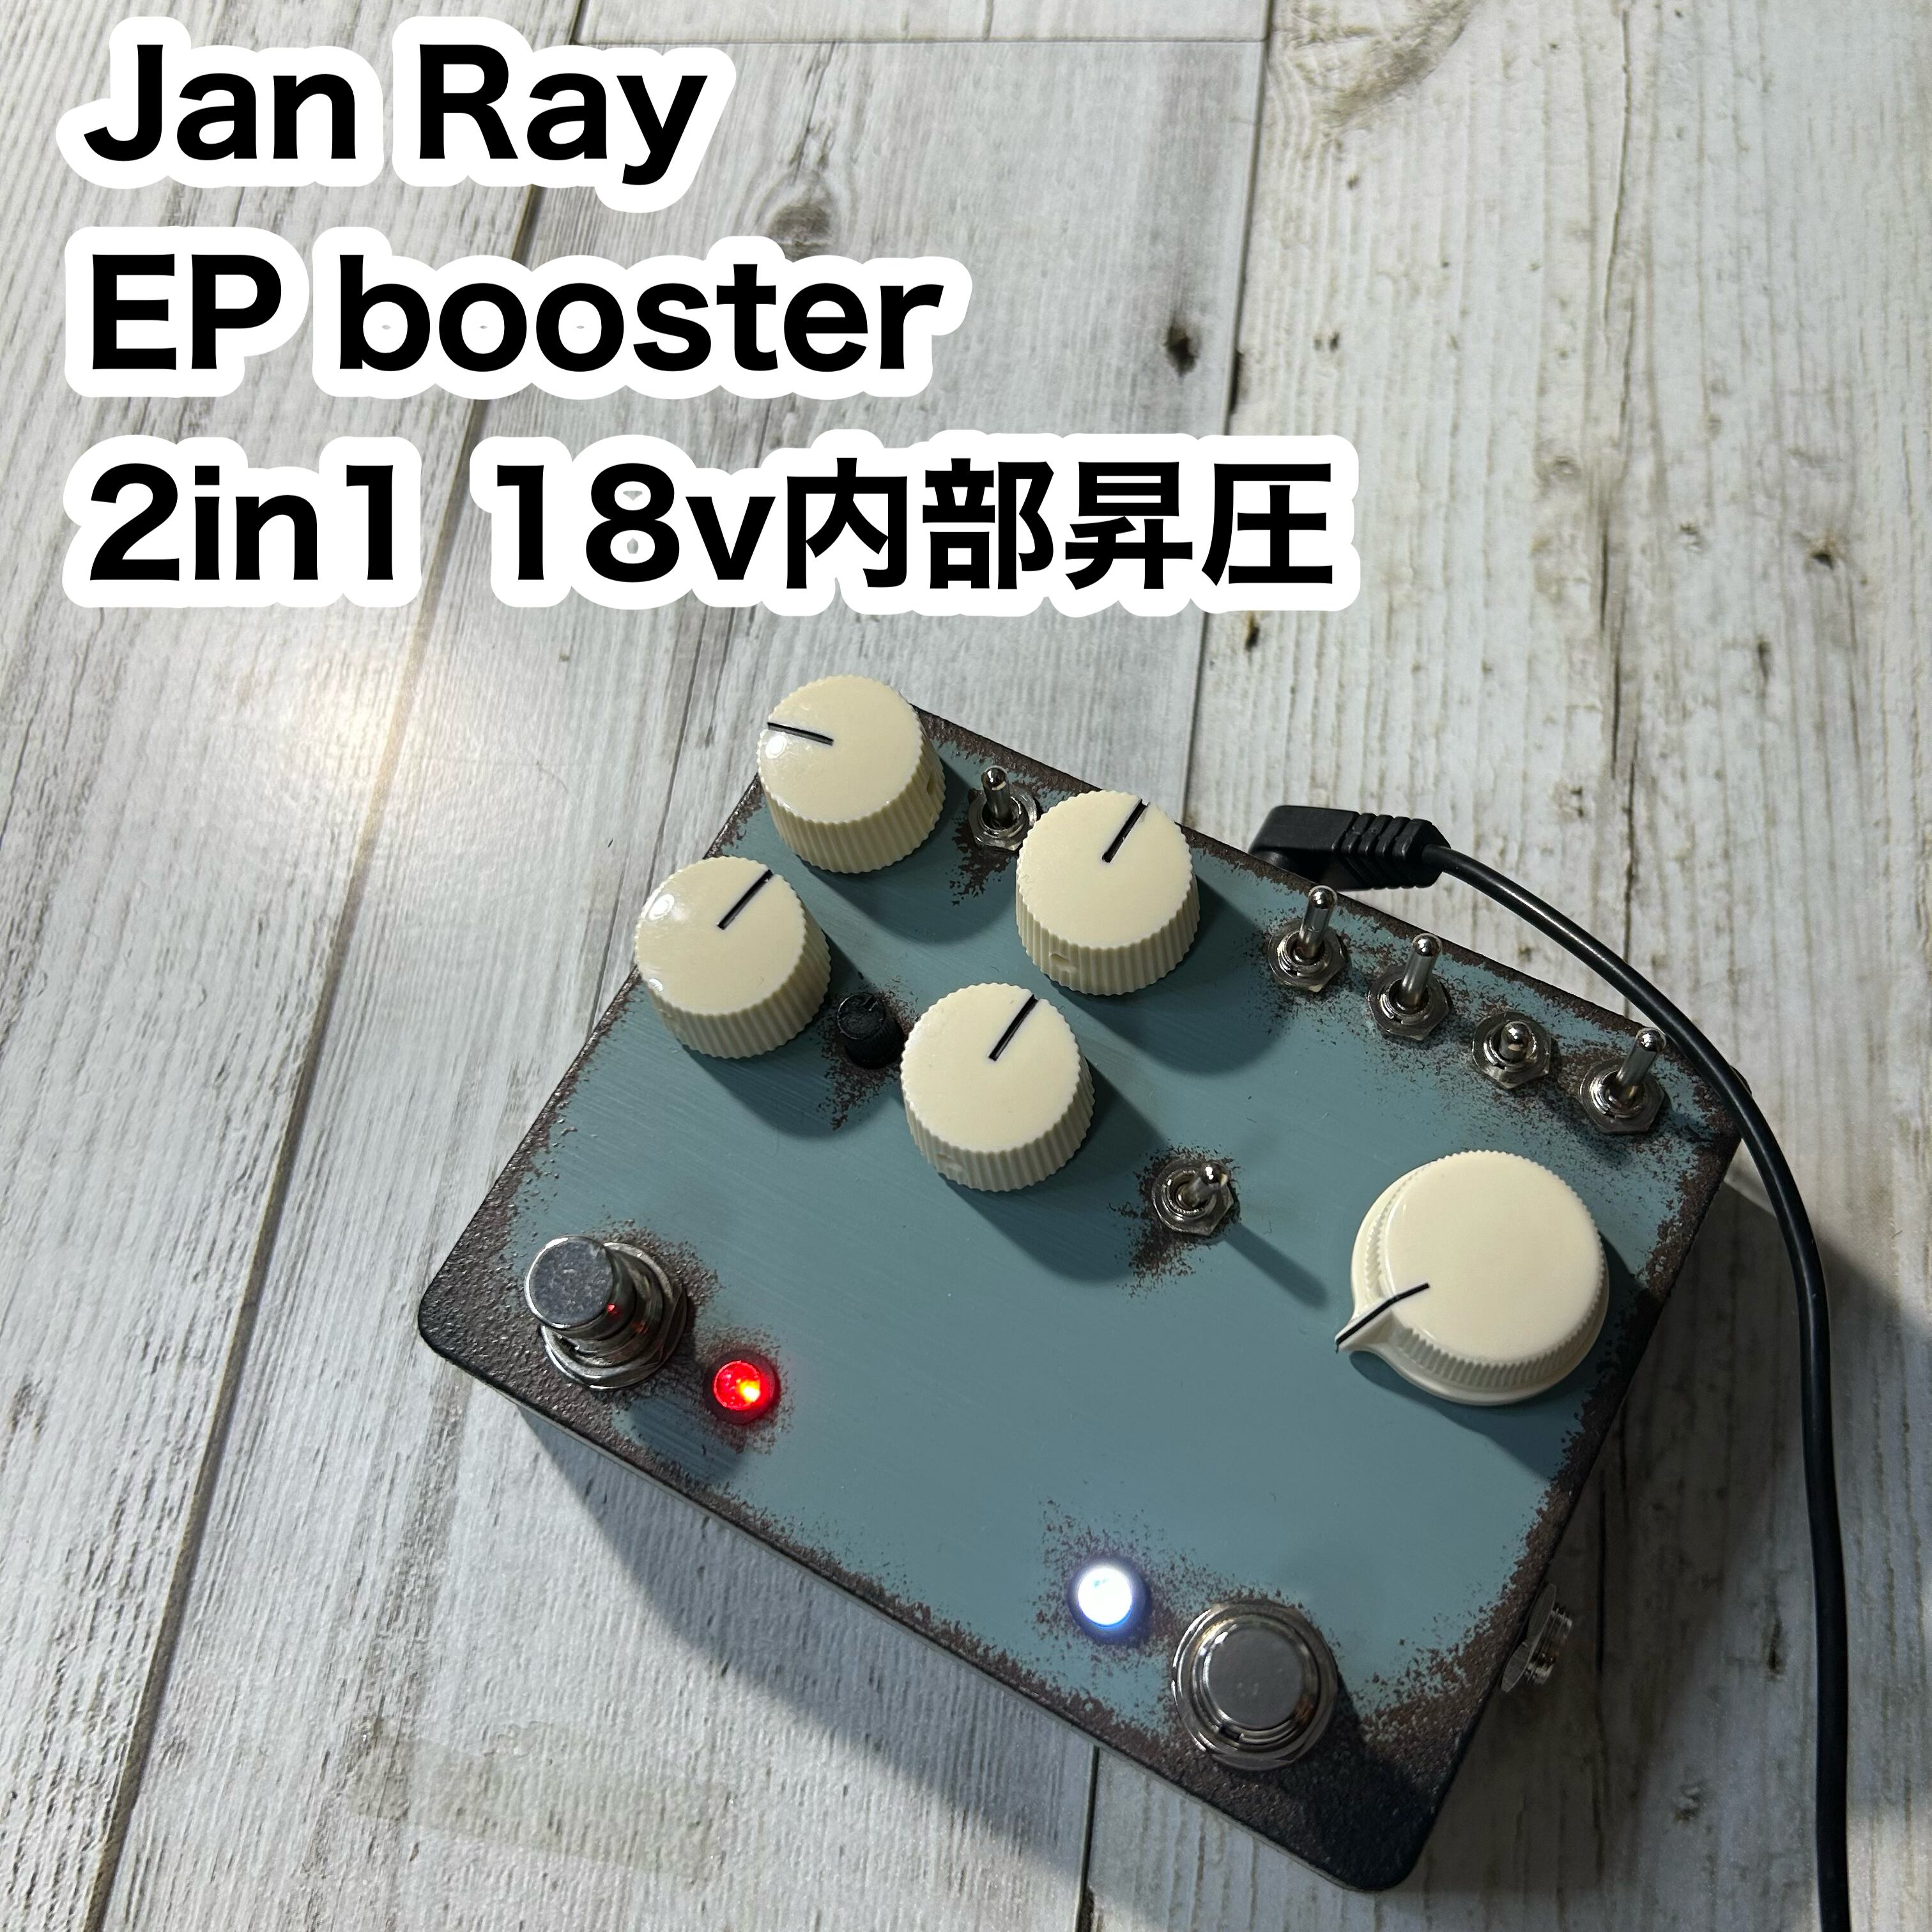 Jan Ray + EP booster 2in1 18v-